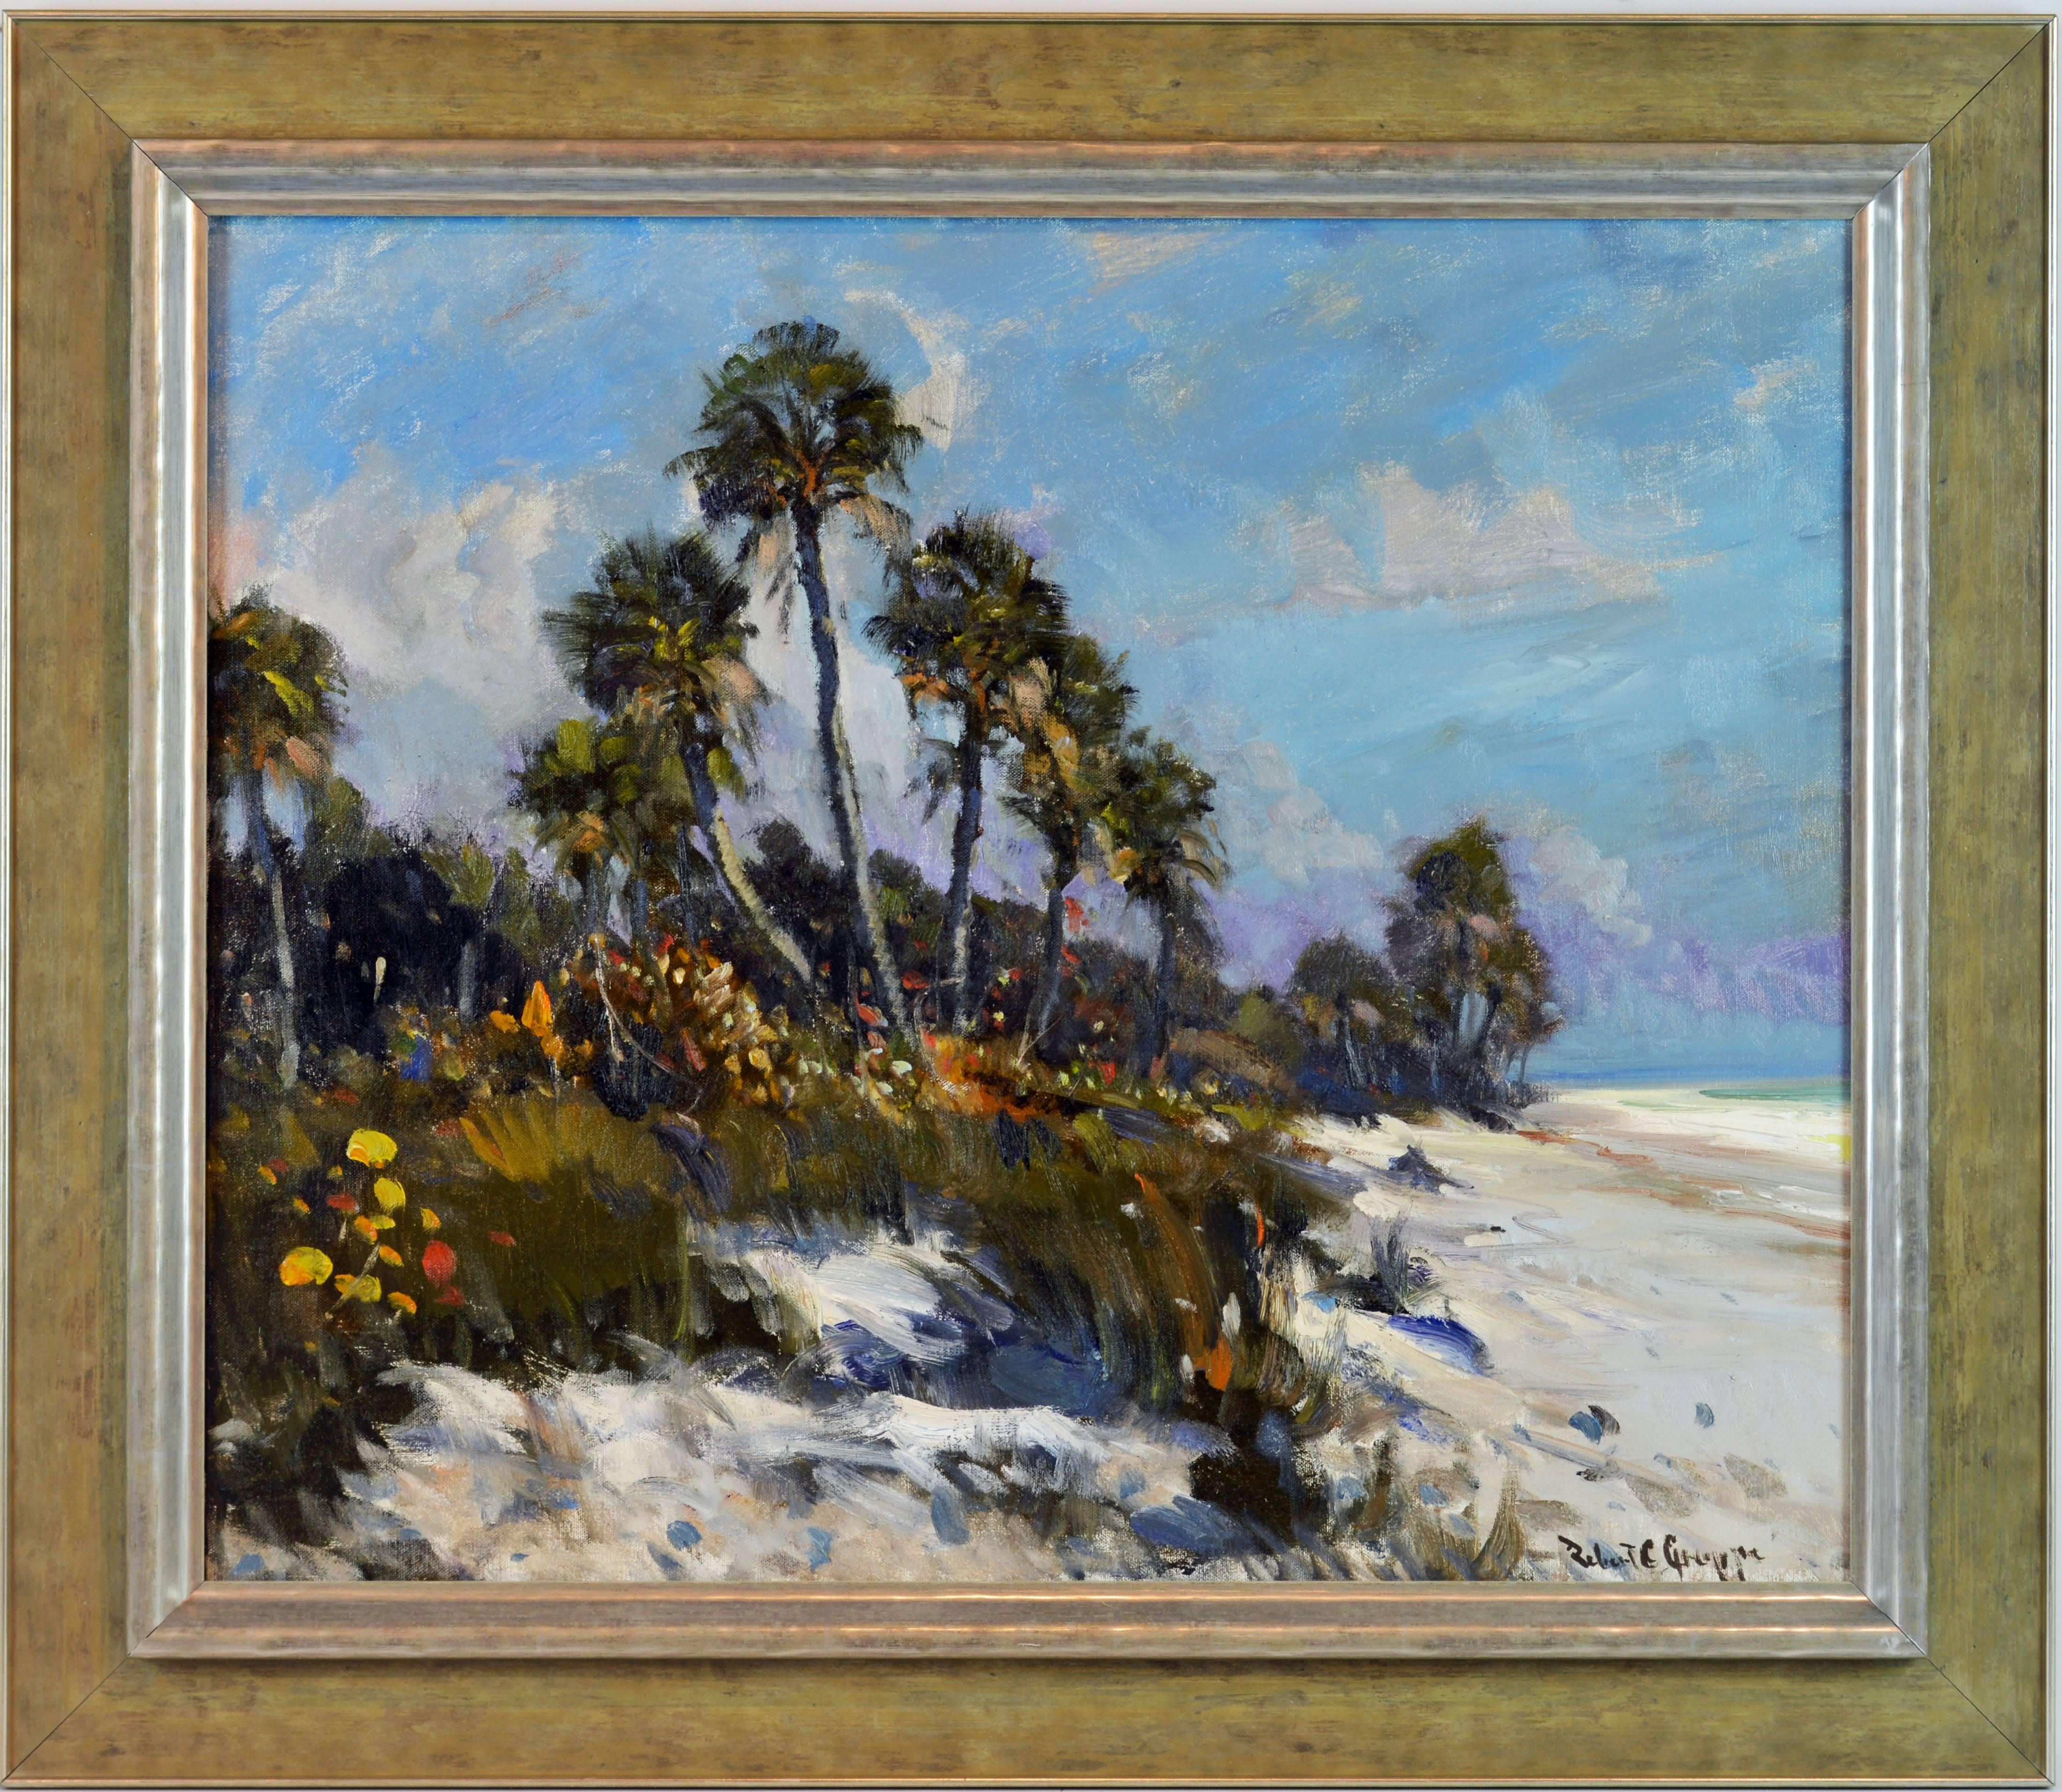 An excellent 25 x 30 in. Oil on canvas by legendary Robert C, Gruppe, American B. 1944 with confident brushstrokes and a subtle palette Robert Gruppe captures the very essence of the unspoiled tropical beach. Signed on the front and titled by the